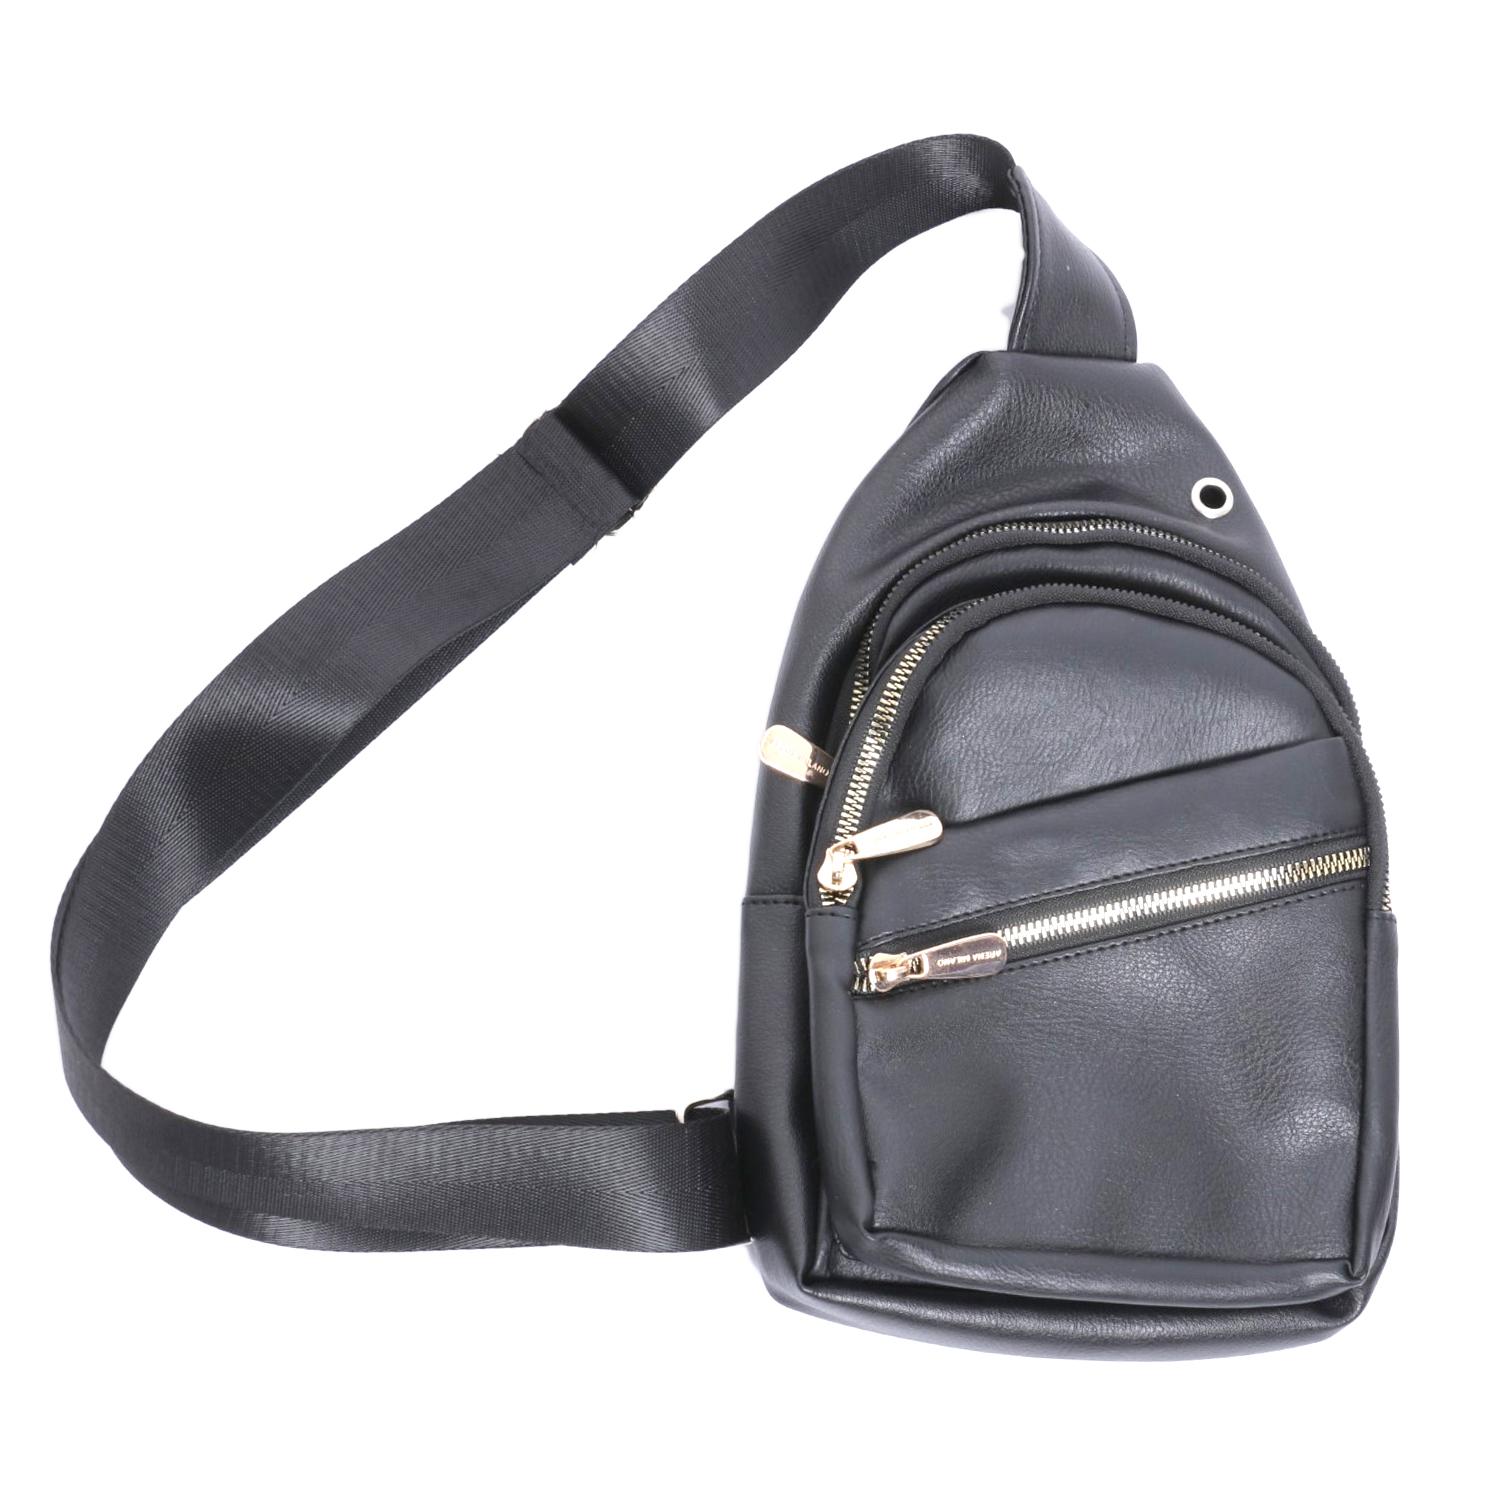 Men's Office Bags In Nepal At Best Prices 